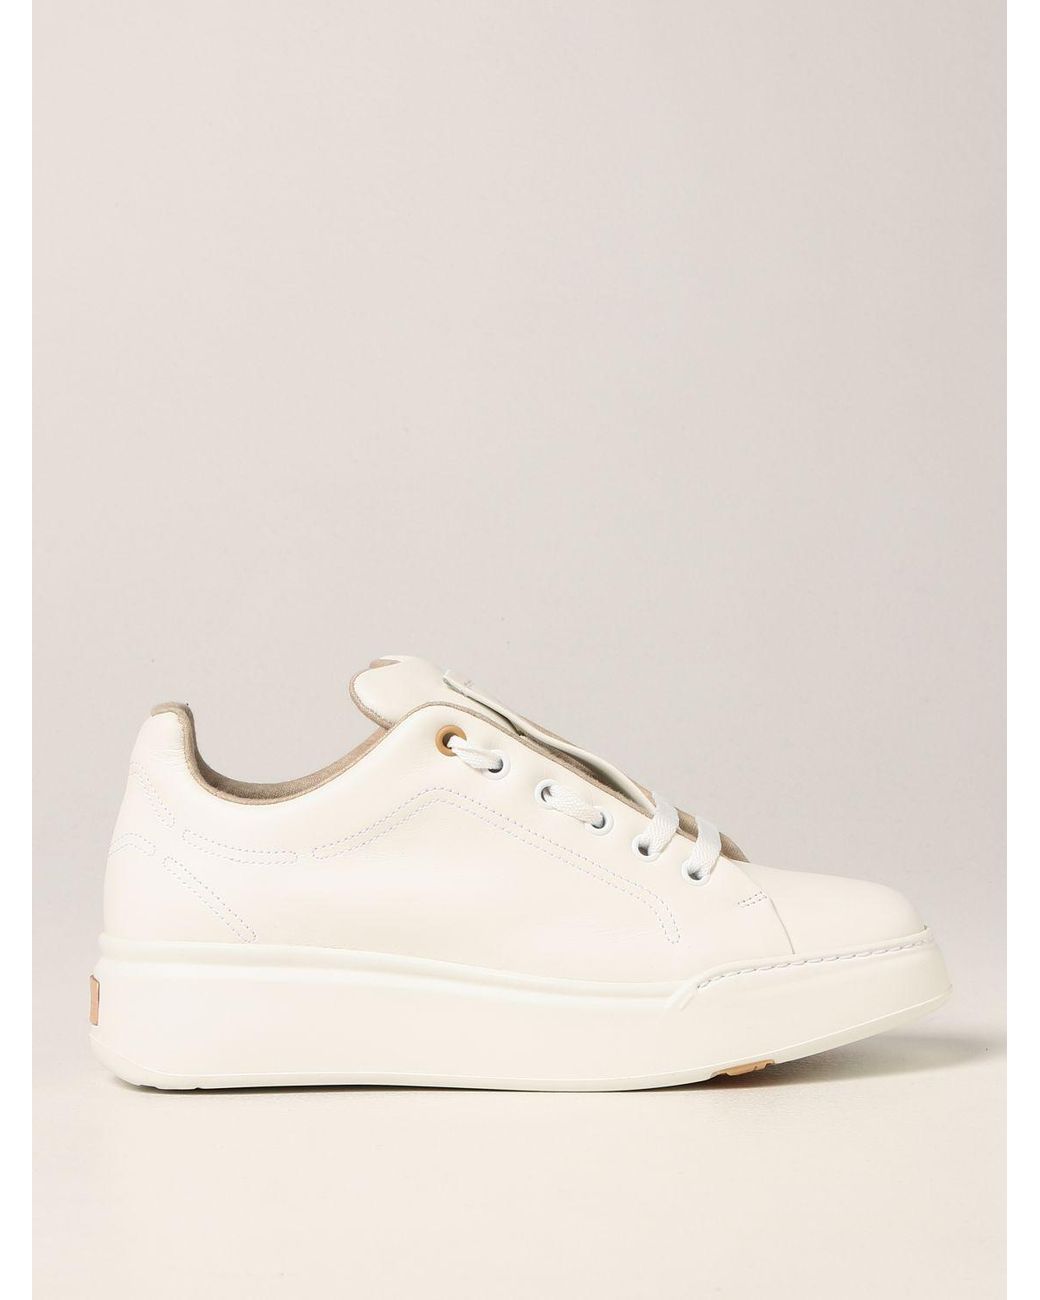 Max Mara Leather Sneakers in Natural | Lyst